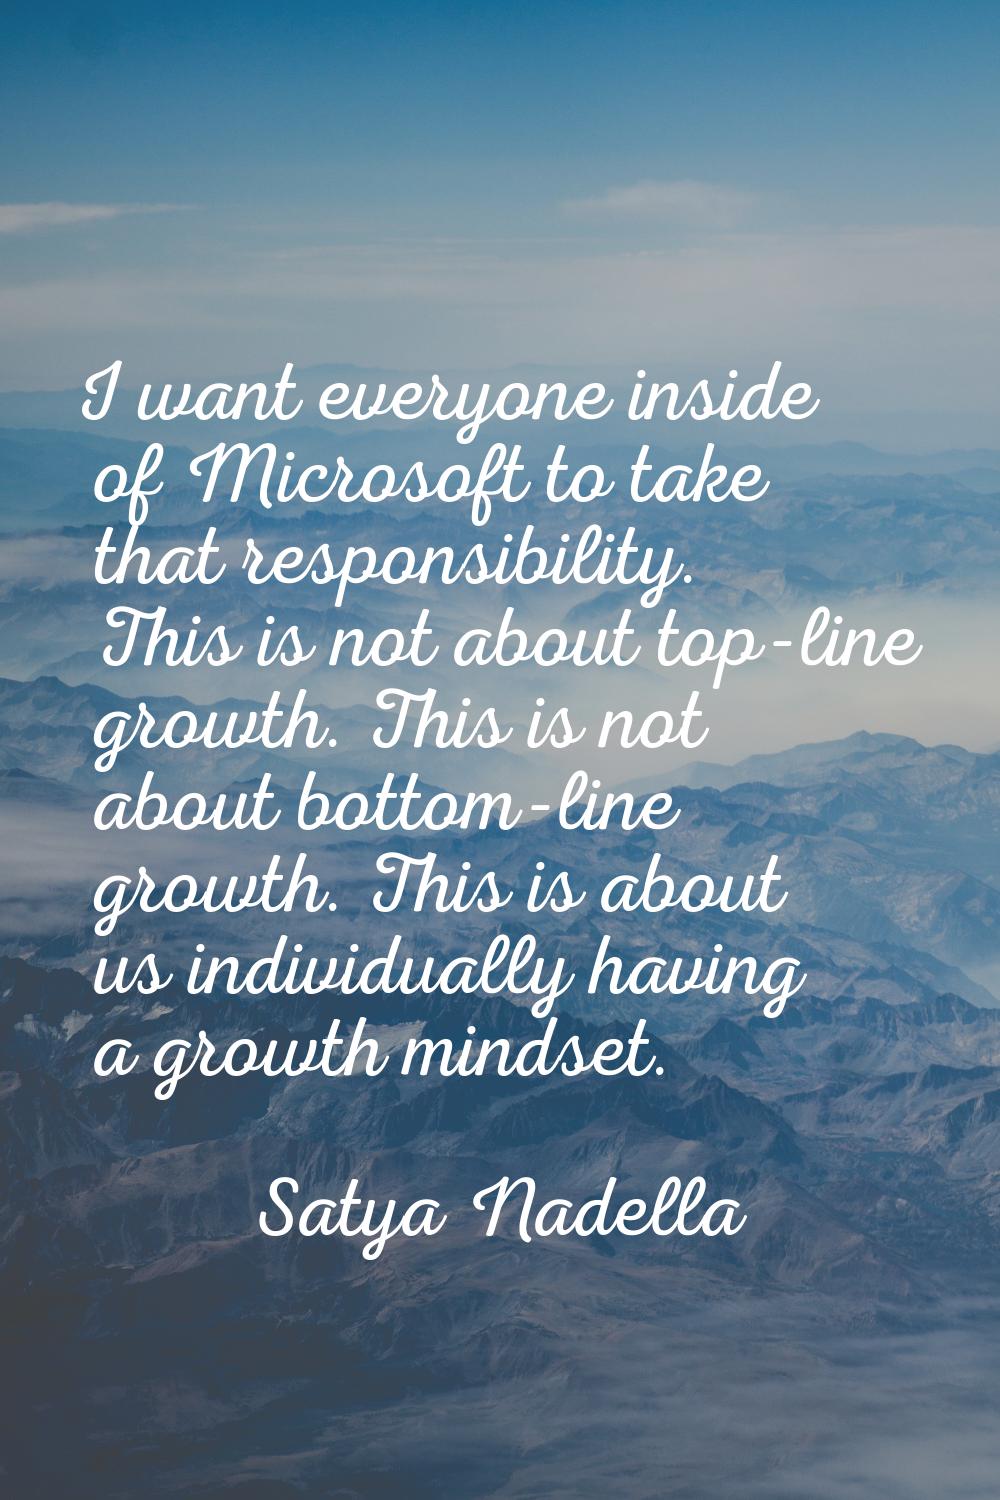 I want everyone inside of Microsoft to take that responsibility. This is not about top-line growth.